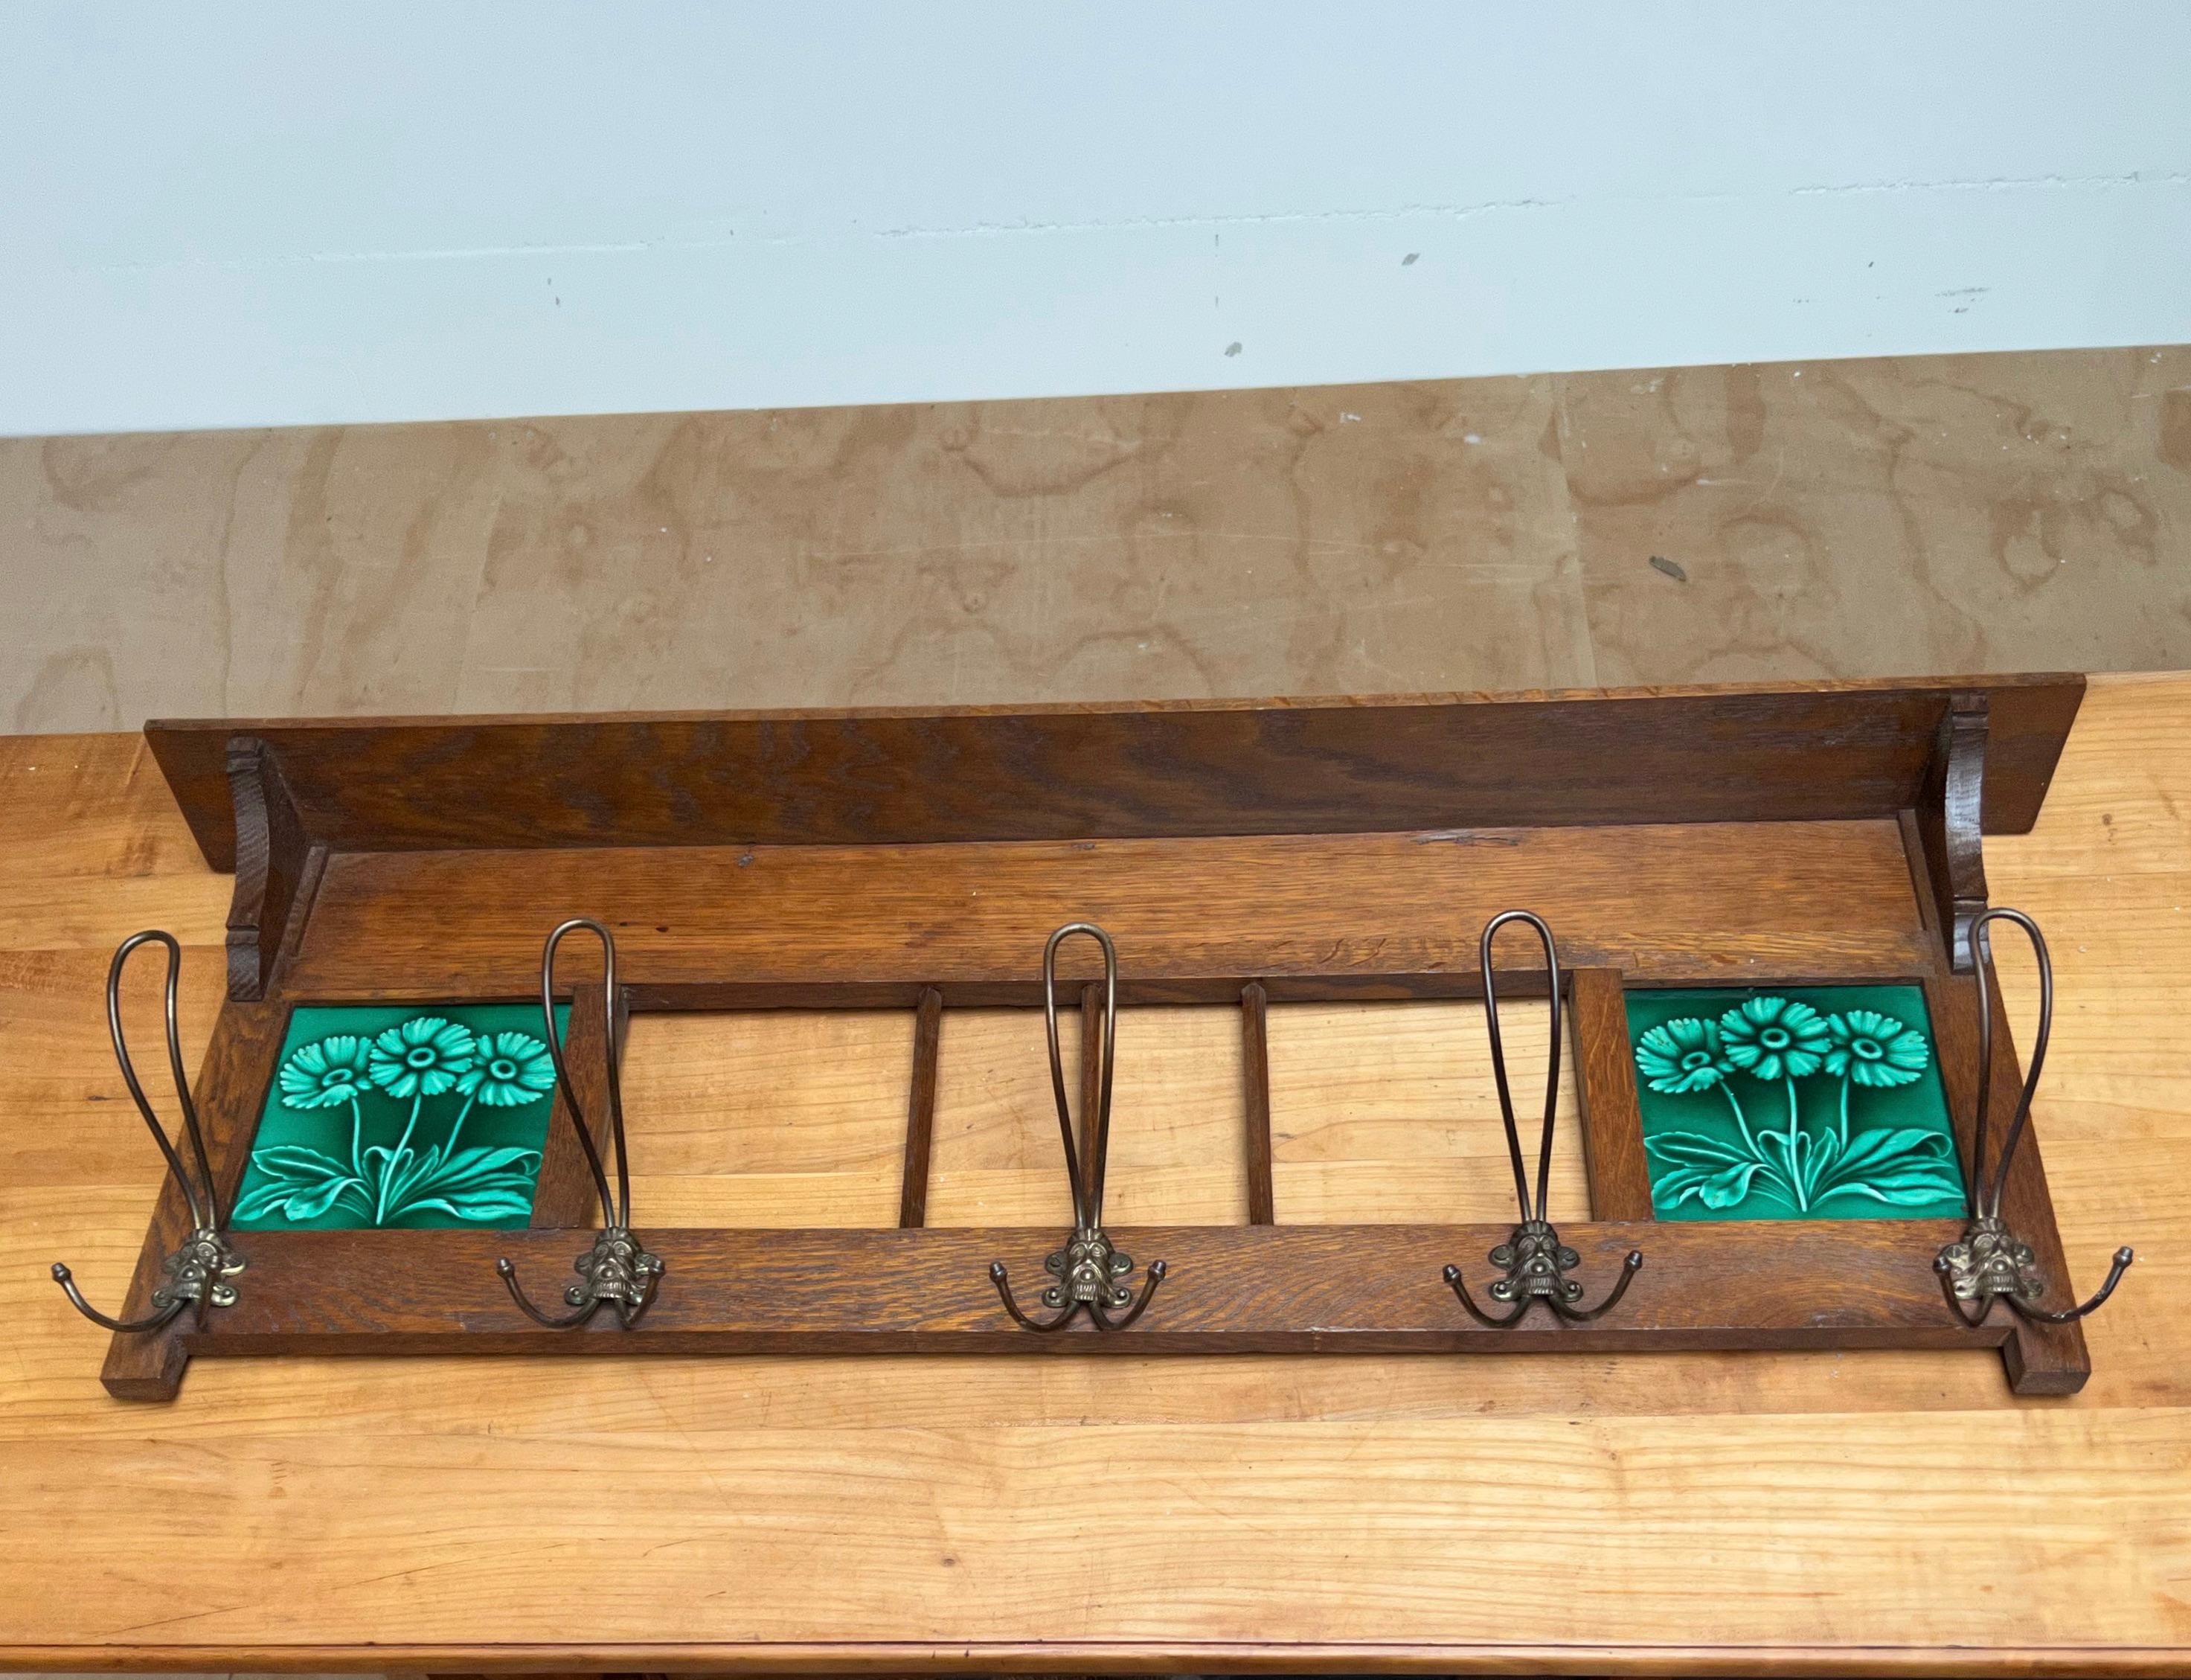 Stunning design and mint condition wall coat rack.

This rare and highly stylish Arts & Crafts coat rack is entirely original and in amazing condition. Its relatively small size makes it also suitable for smaller entrances or even for a bedroom.